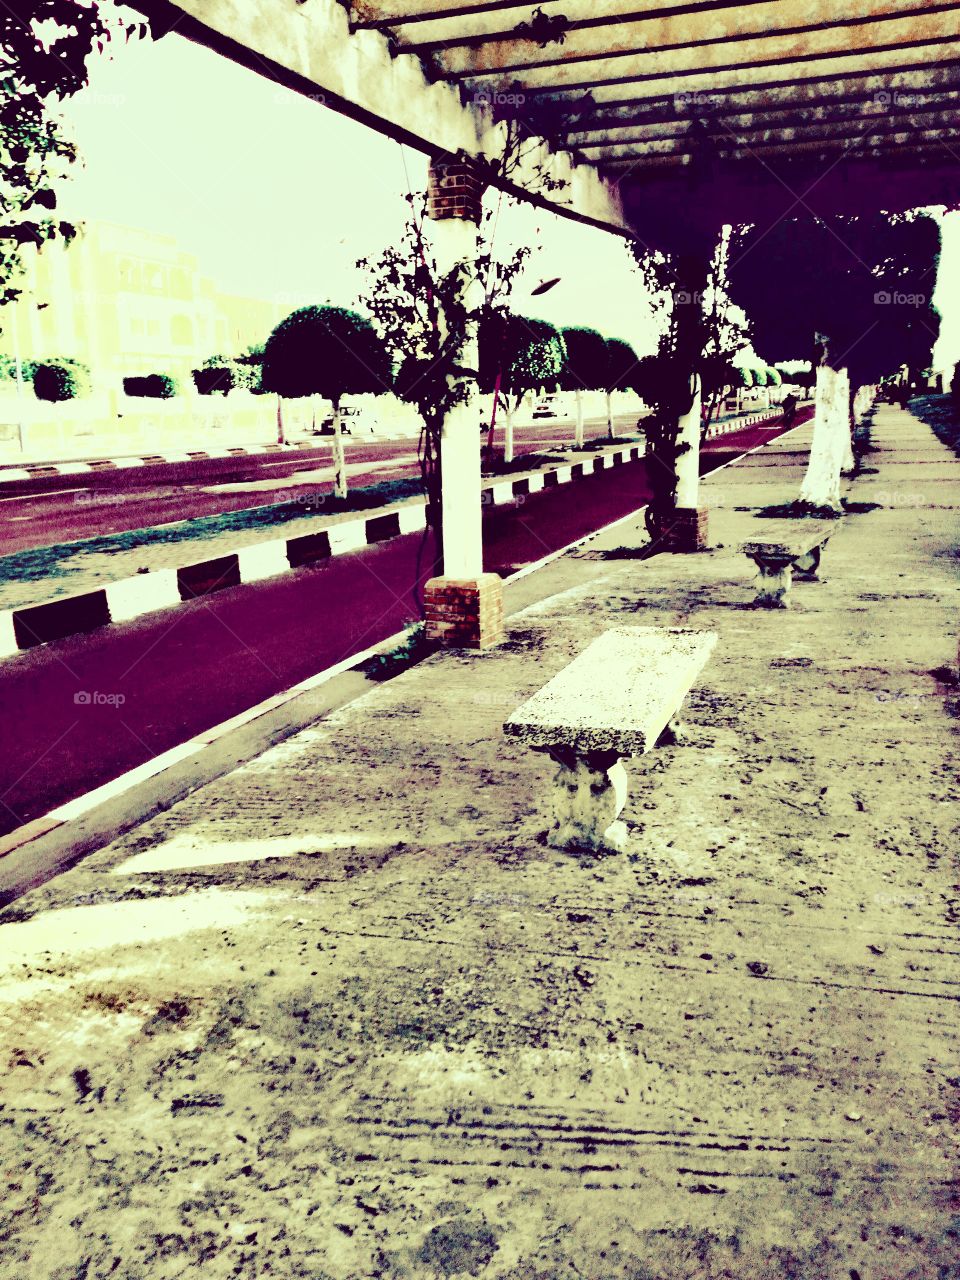 a seat beide the road in safi city